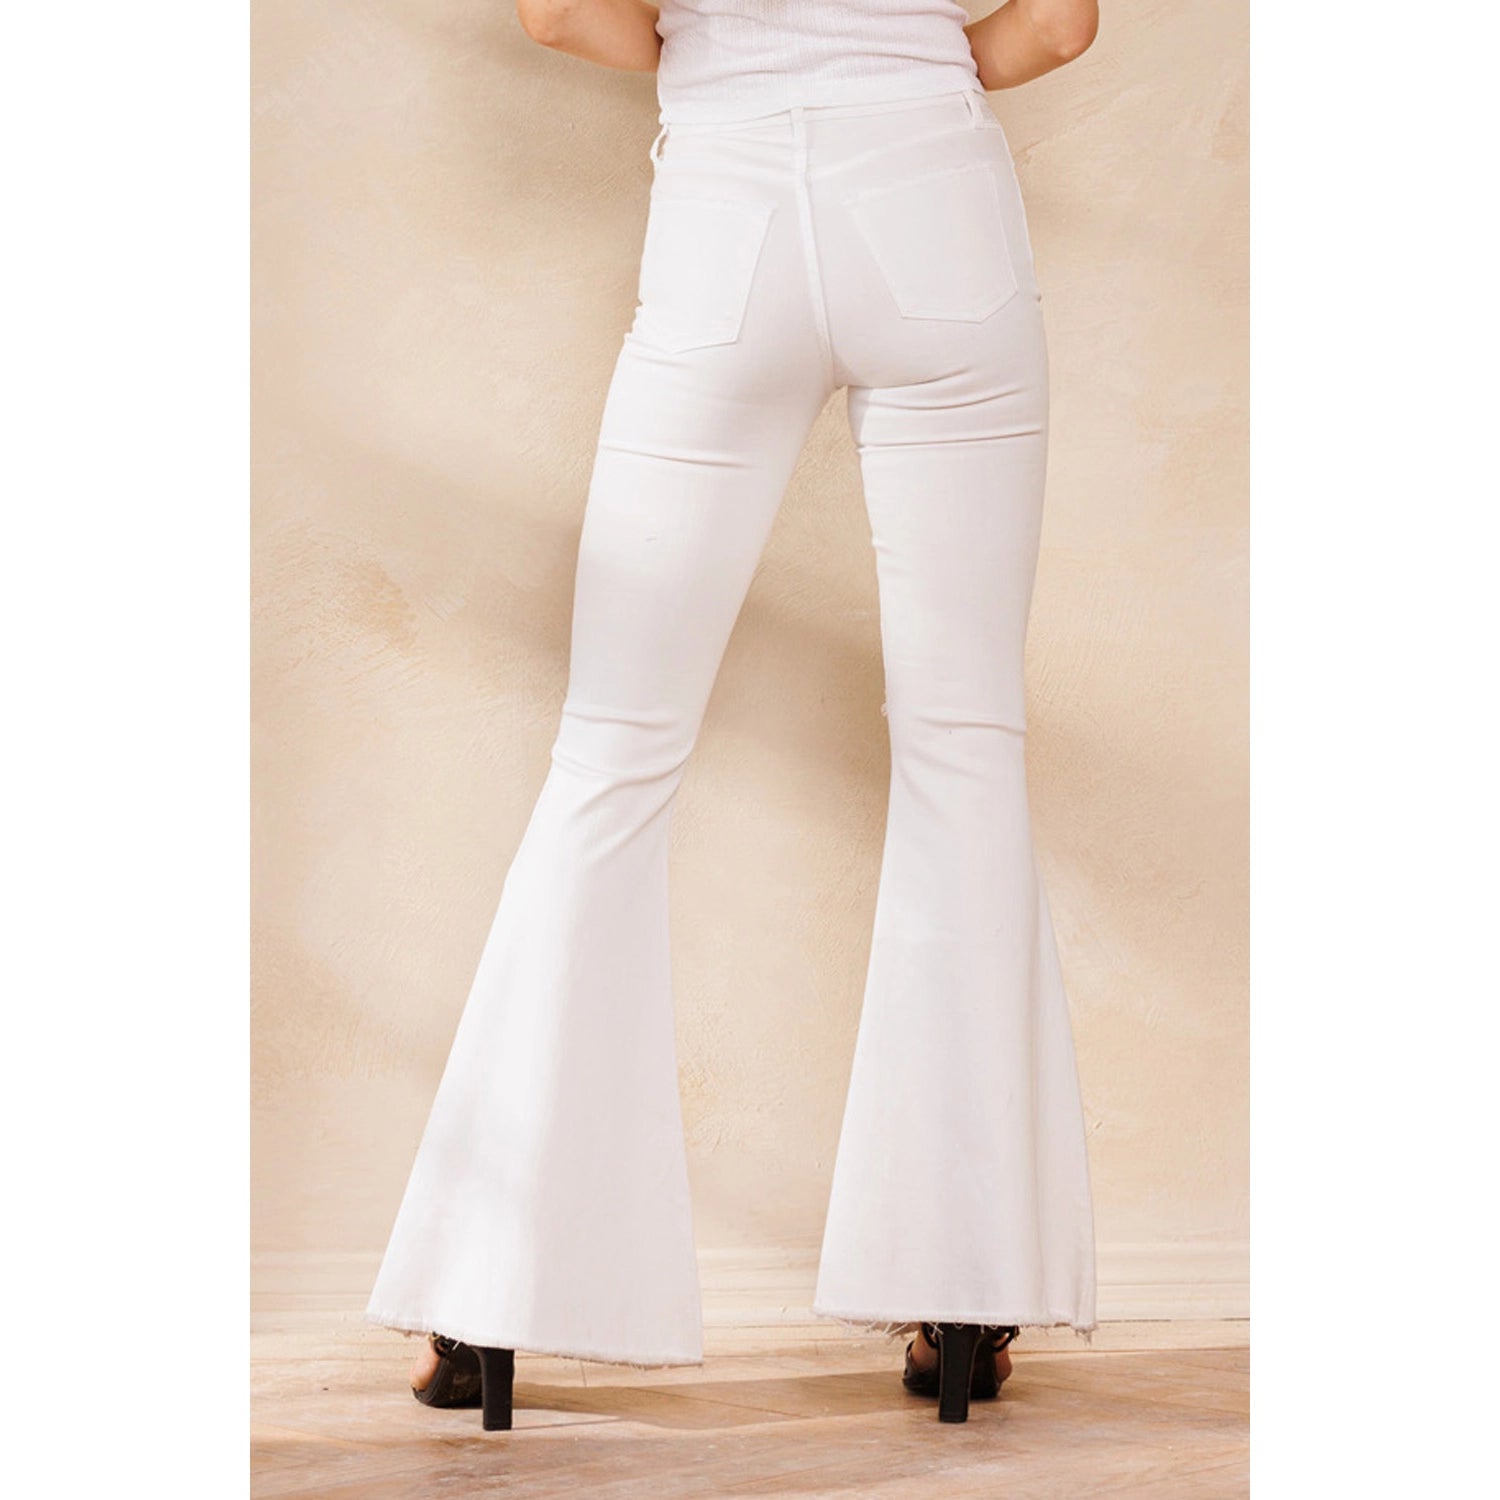 Buy High Rise Distressed White Flare Jeans with Raw Online | Sissy Boutique